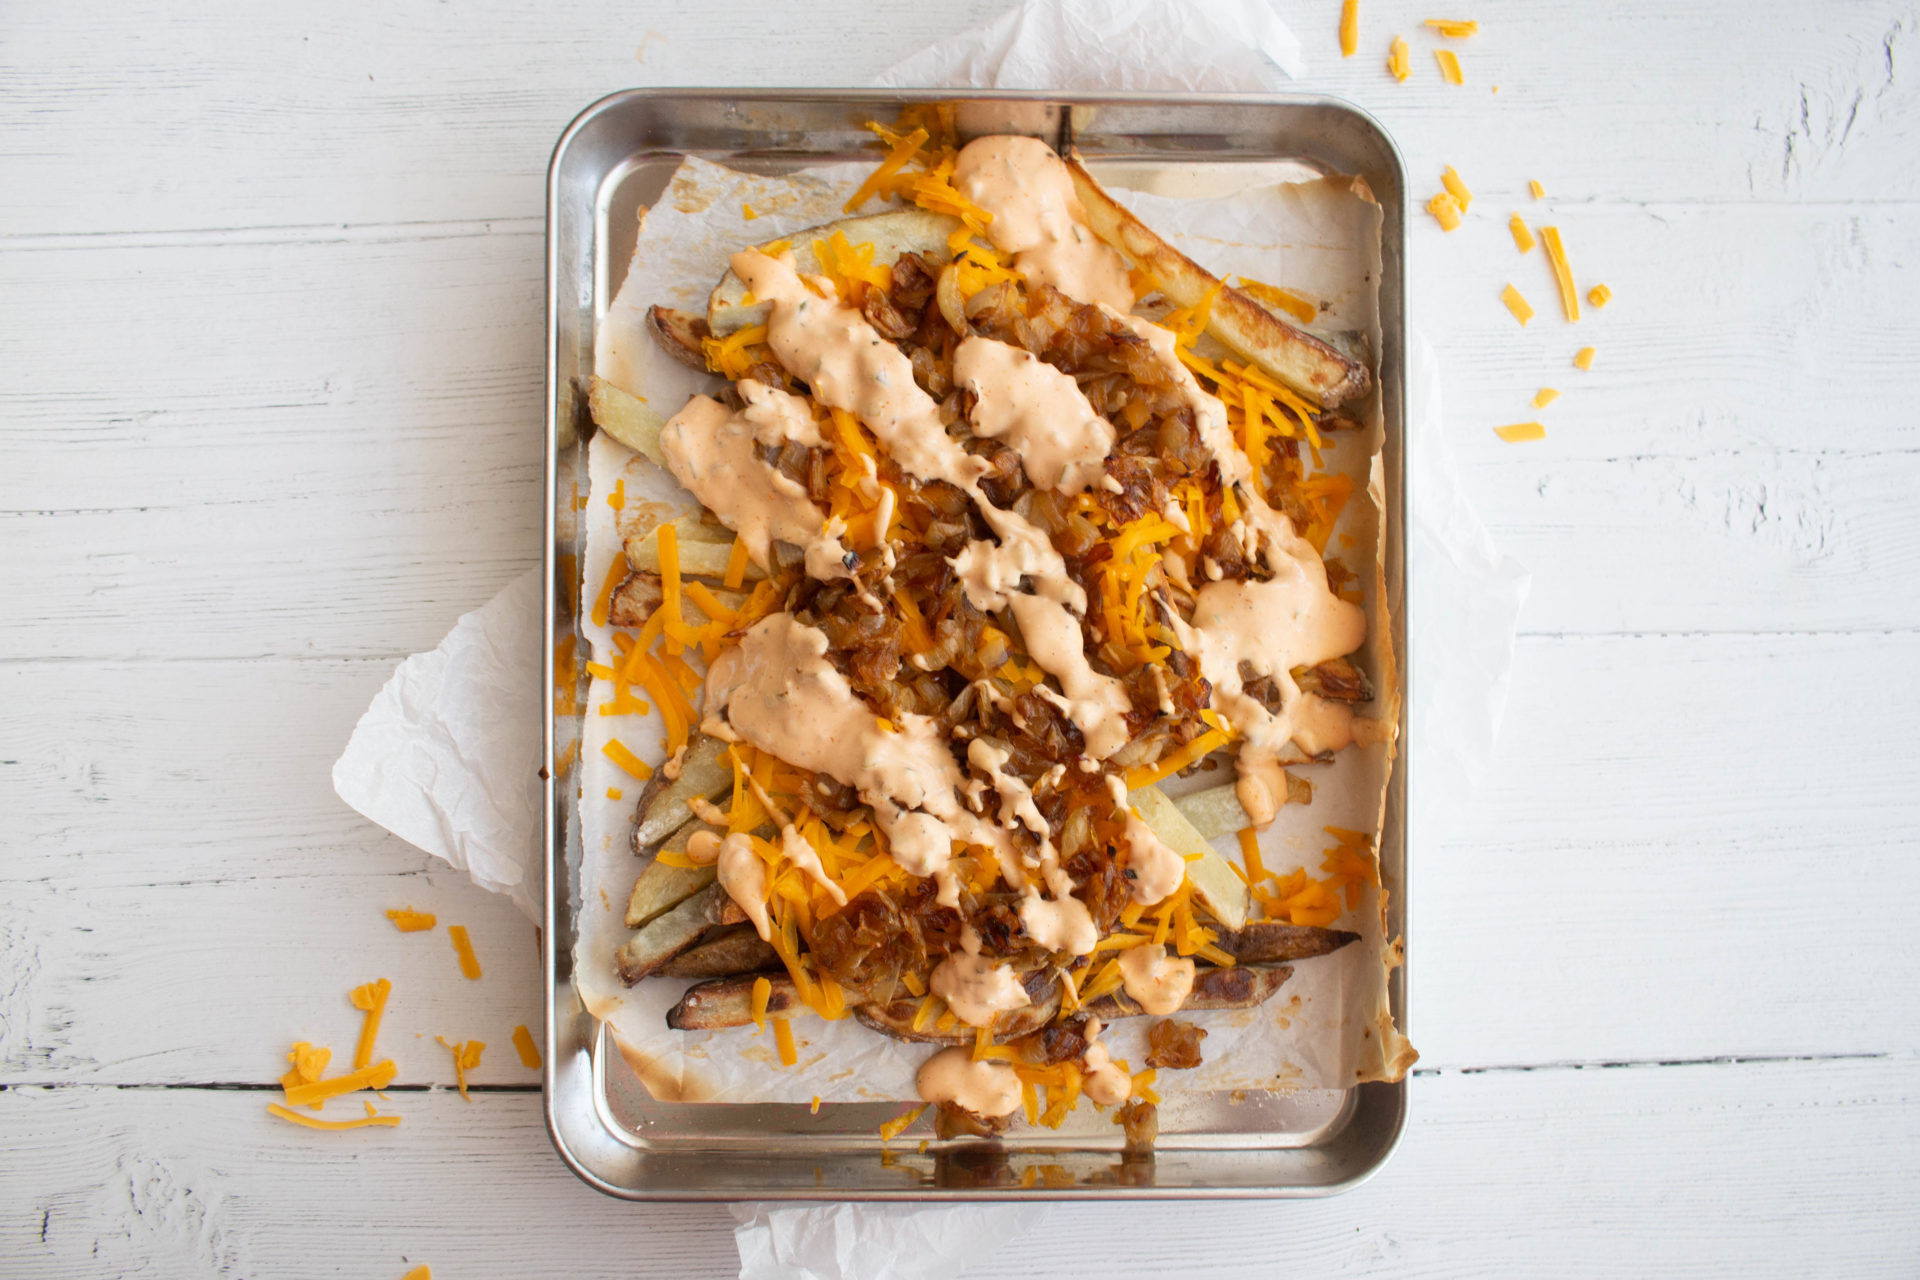 A delightful vegan copycat version of In N Out's animal style fries